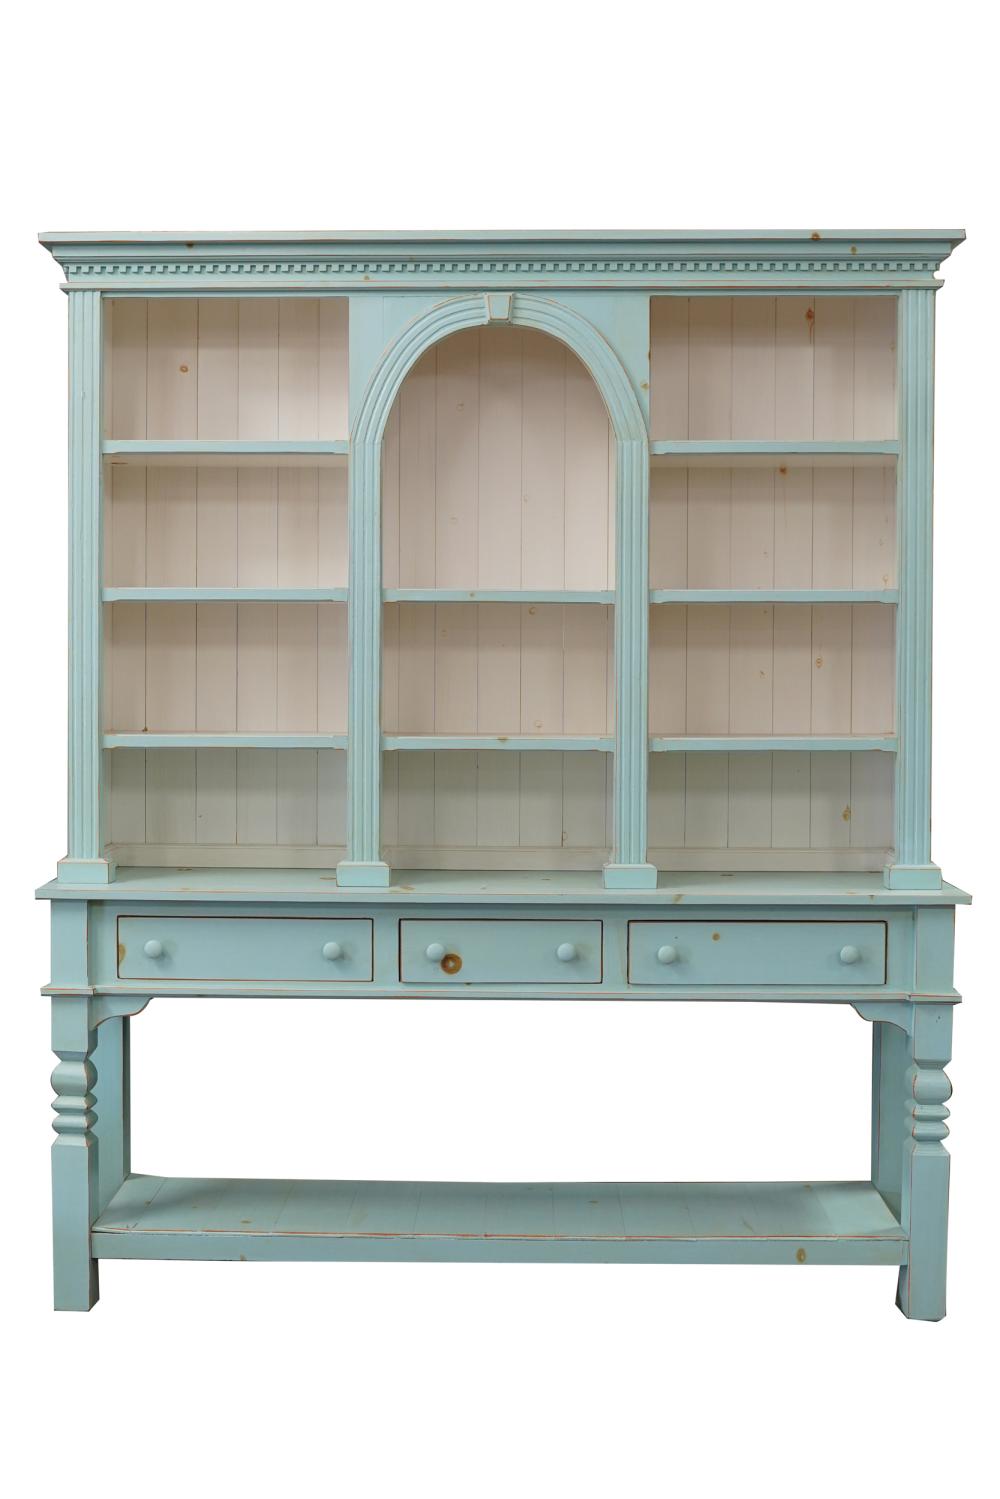 BLUE-PAINTED PINE HUTCHlate 20th century,